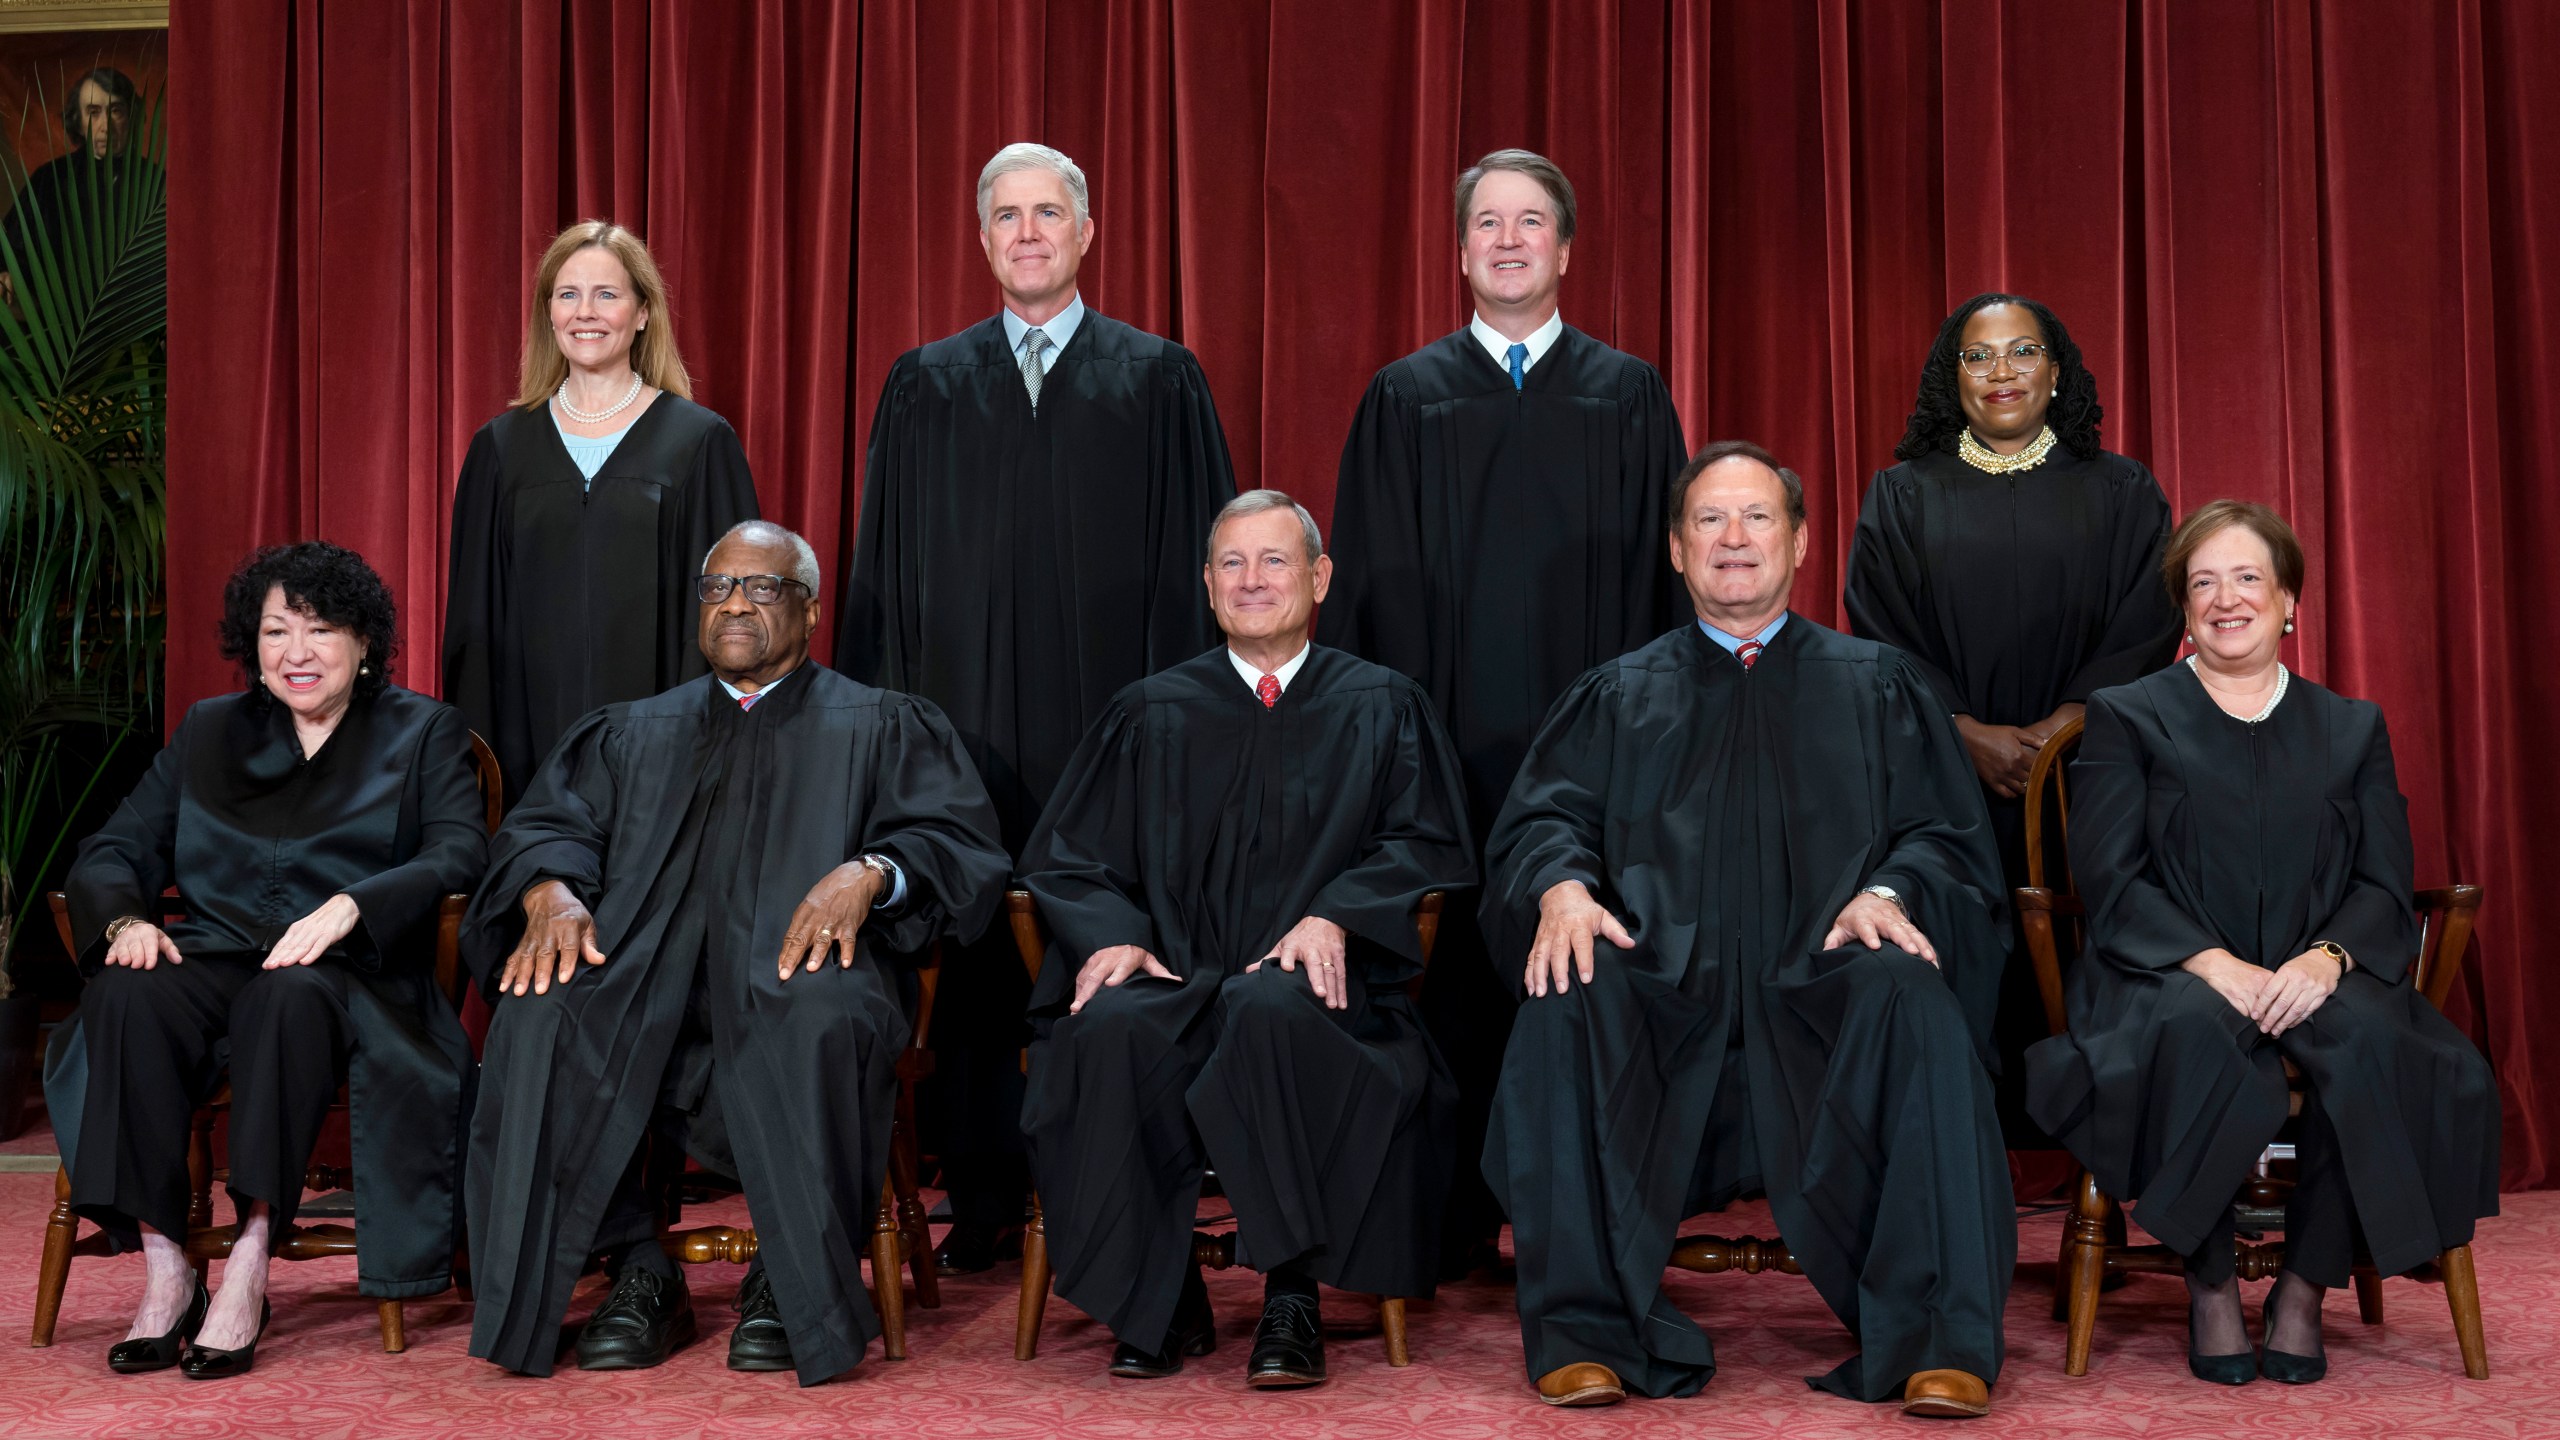 FILE - Members of the Supreme Court sit for a new group portrait following the addition of Associate Justice Ketanji Brown Jackson, at the Supreme Court building in Washington, Oct. 7, 2022. Bottom row, from left, Justice Sonia Sotomayor, Justice Clarence Thomas, Chief Justice of the United States John Roberts, Justice Samuel Alito, and Justice Elena Kagan. Top row, from left, Justice Amy Coney Barrett, Justice Neil Gorsuch, Justice Brett Kavanaugh, and Justice Ketanji Brown Jackson. (AP Photo/J. Scott Applewhite, File)